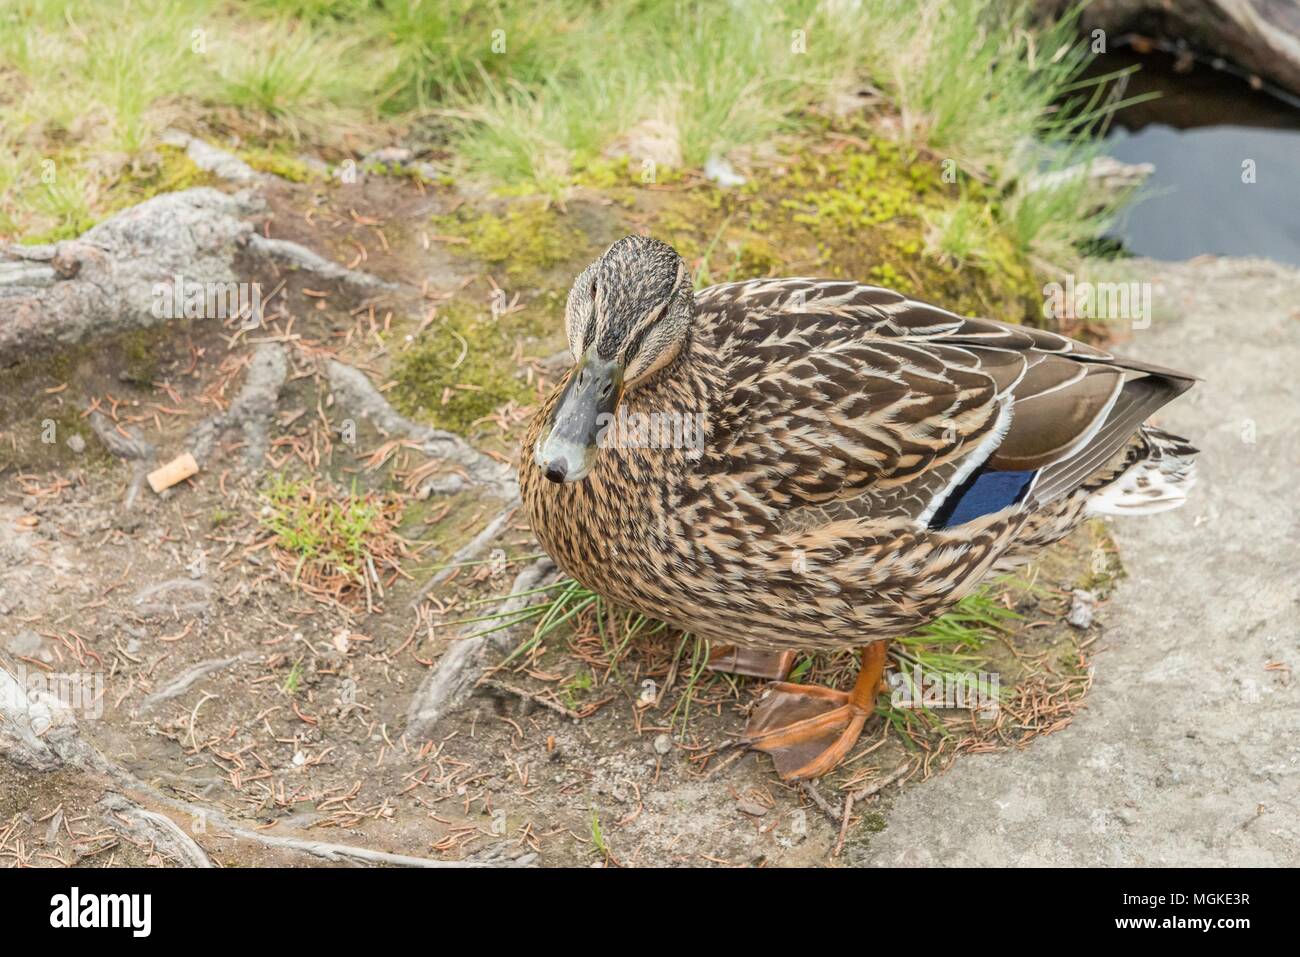 A trustful duck on a lake shore Stock Photo